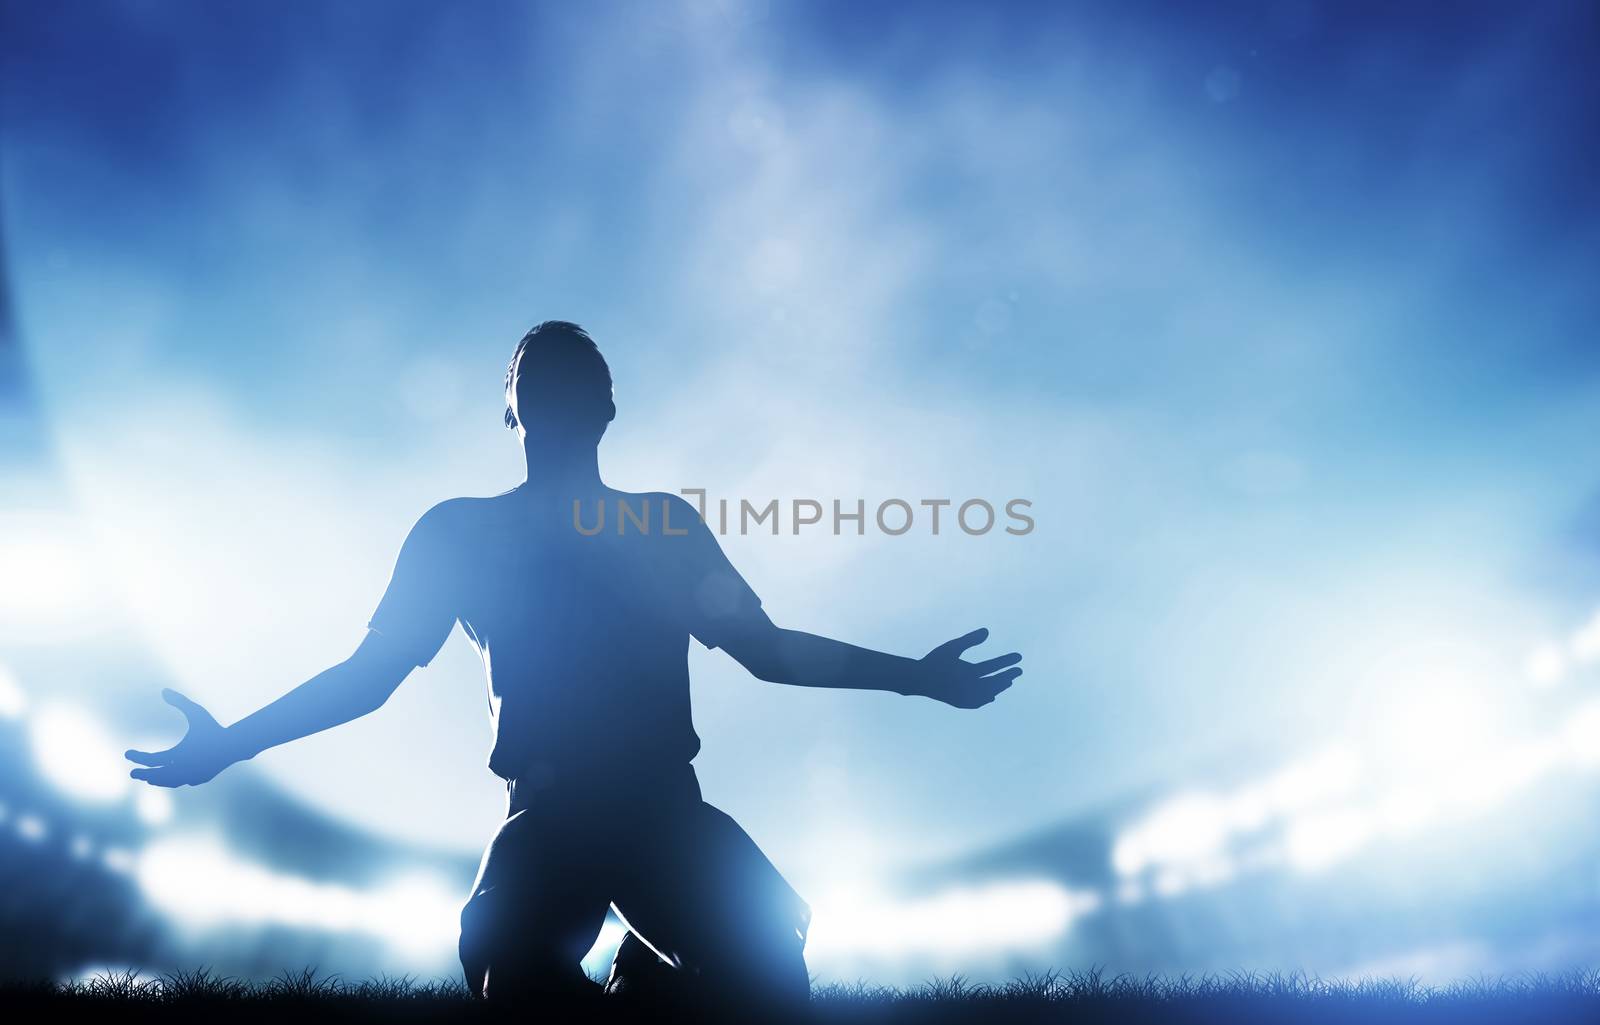 Football, soccer match. A player celebrating goal, victory. Lights on the stadium at night.